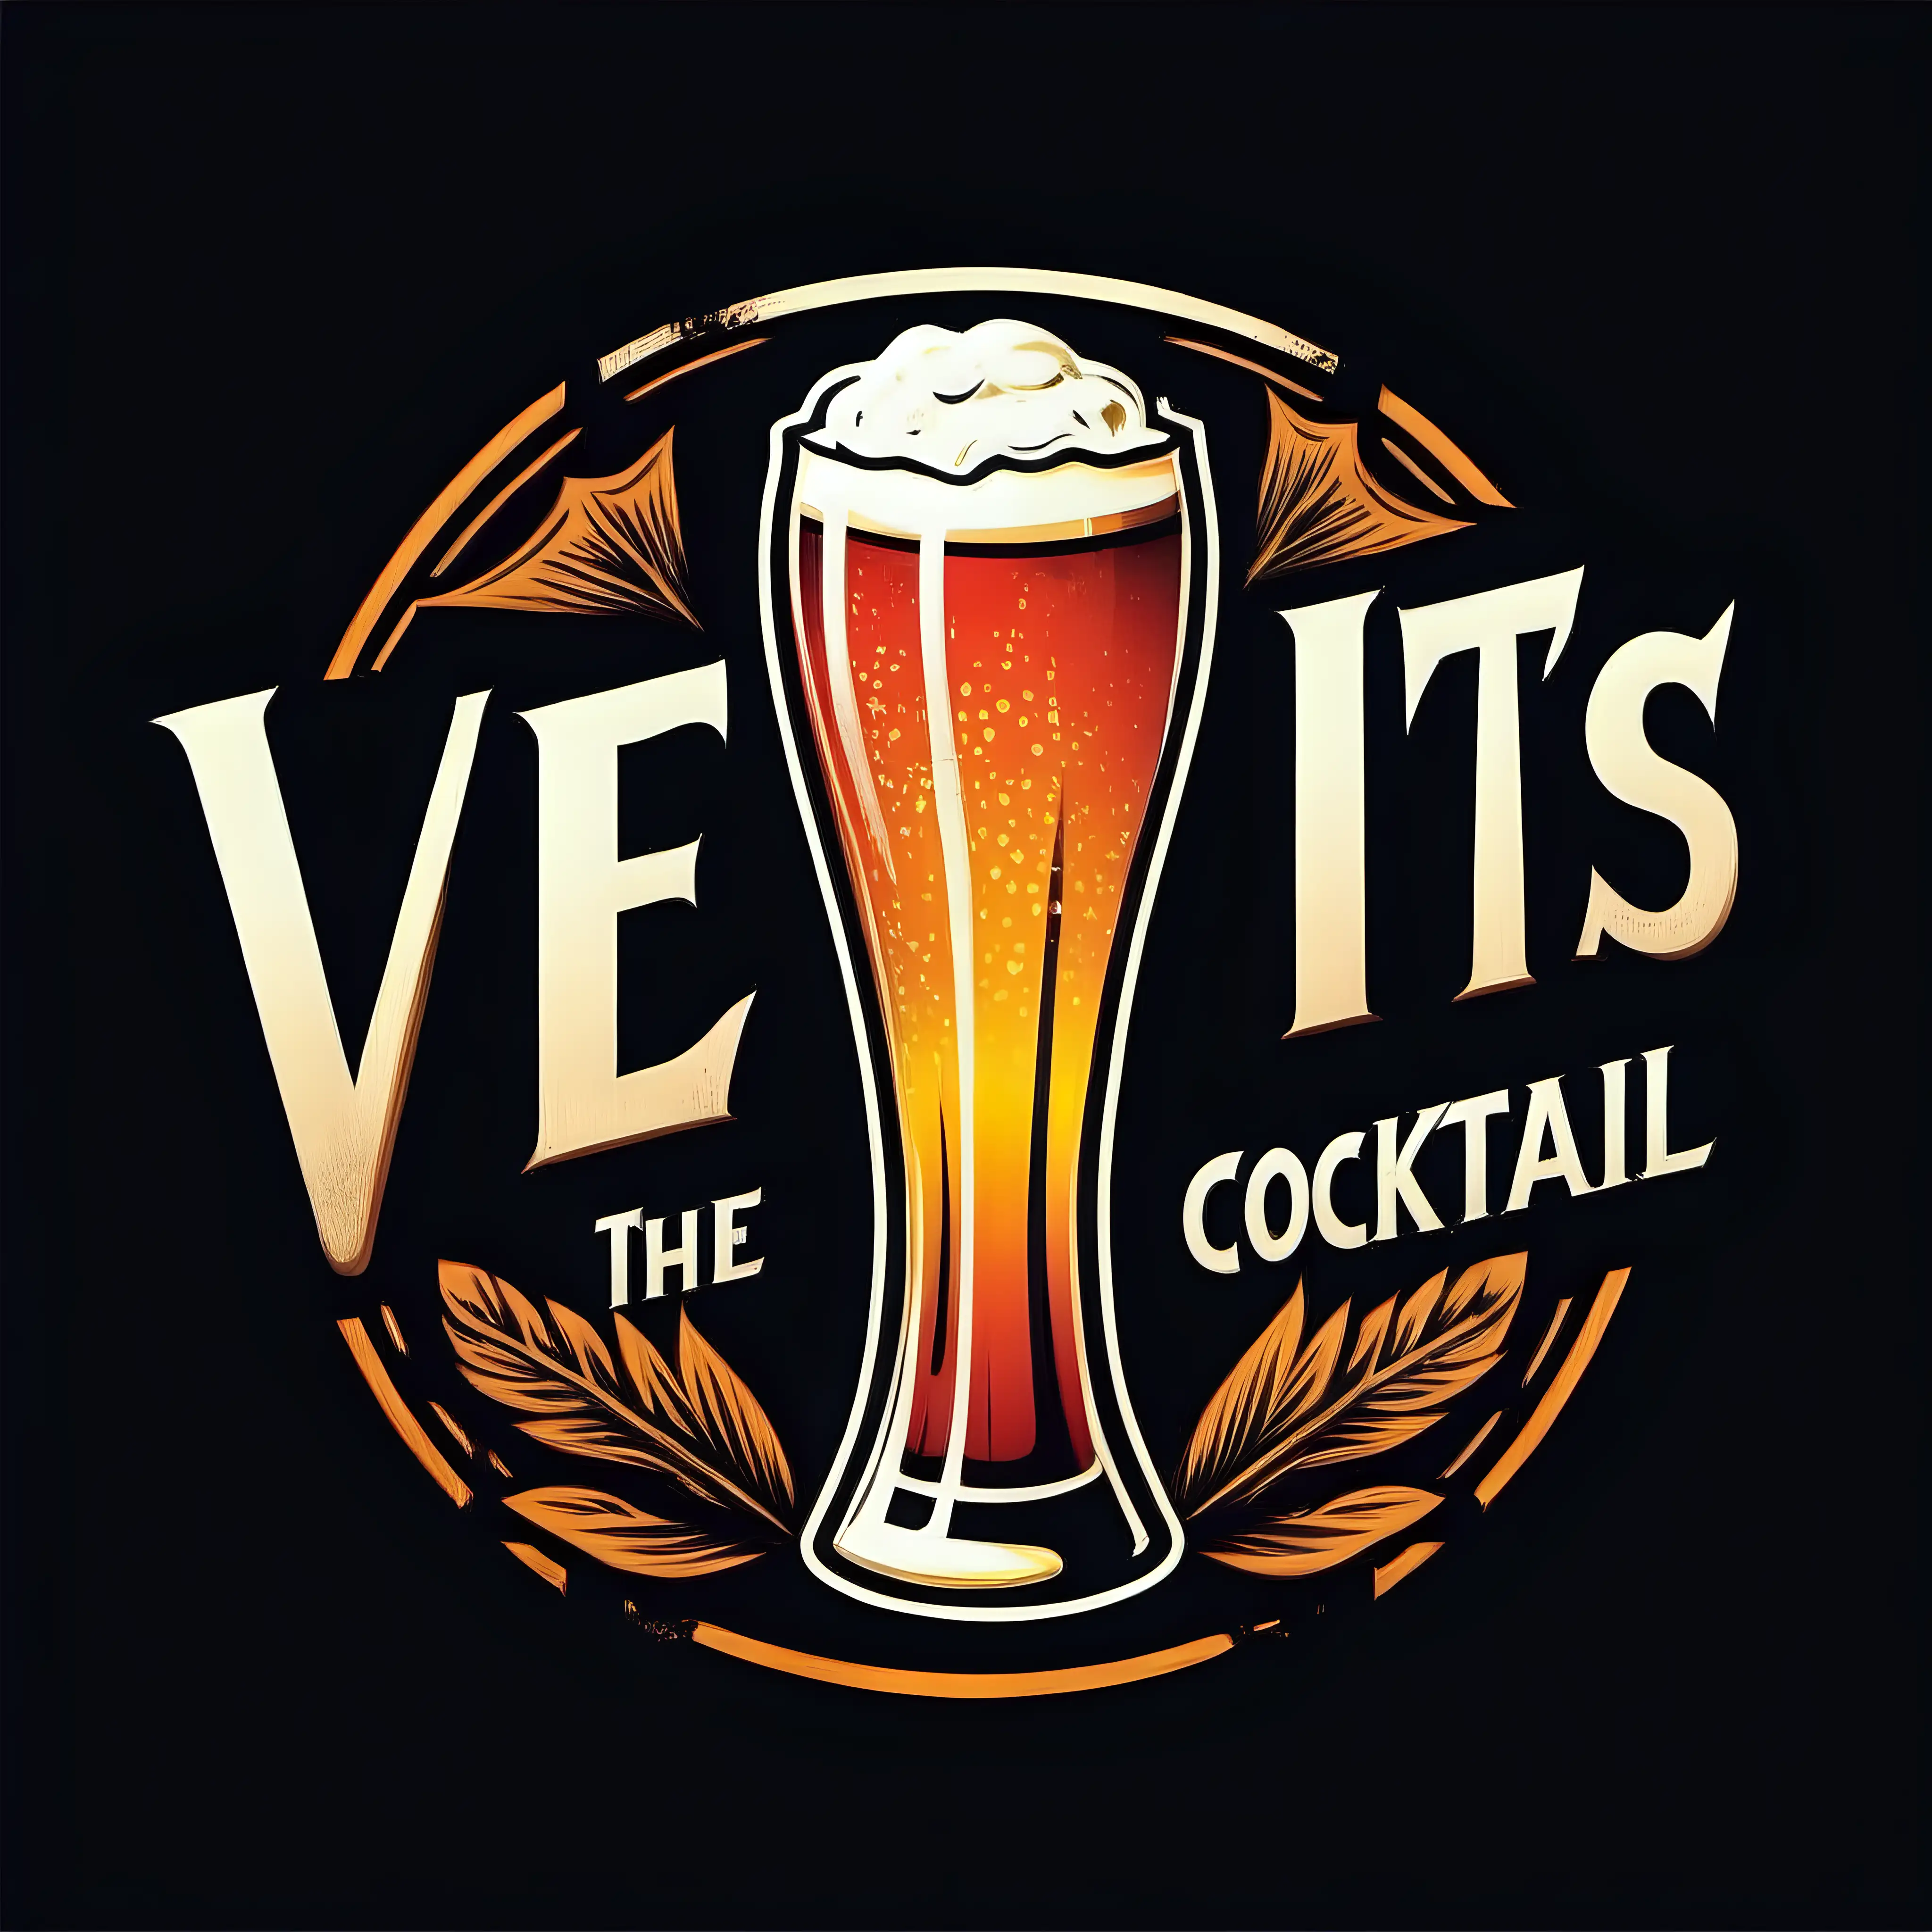 logo beer cocktail, has the word Viet's